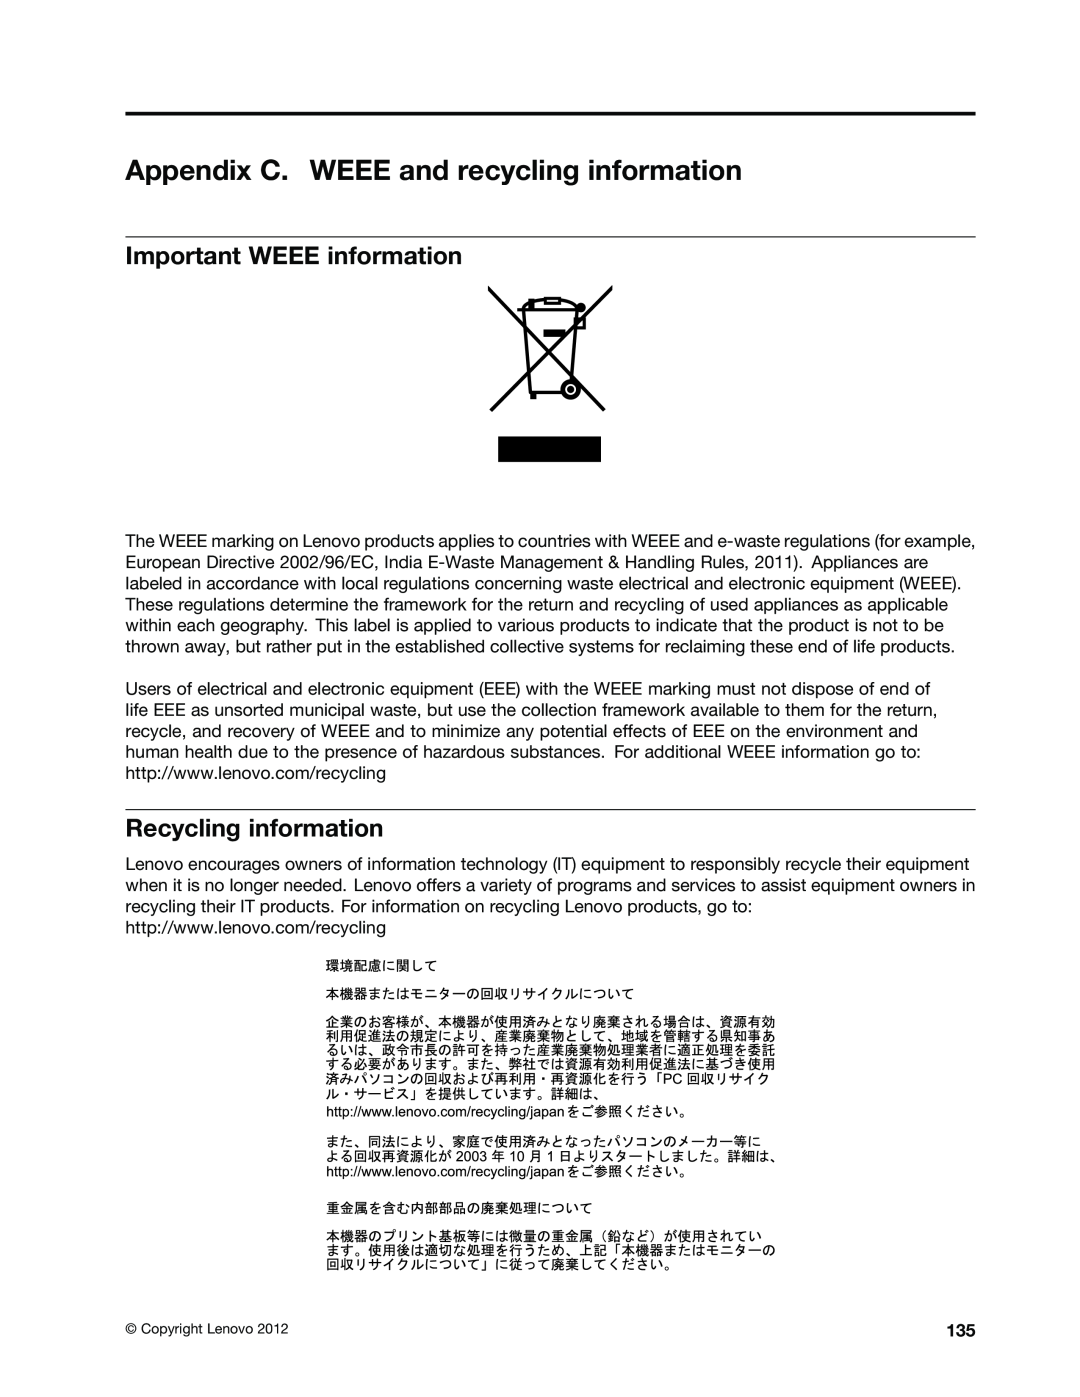 Lenovo 3306, 2988, 2992E5U Appendix C. WEEE and recycling information, Important WEEE information, Recycling information 